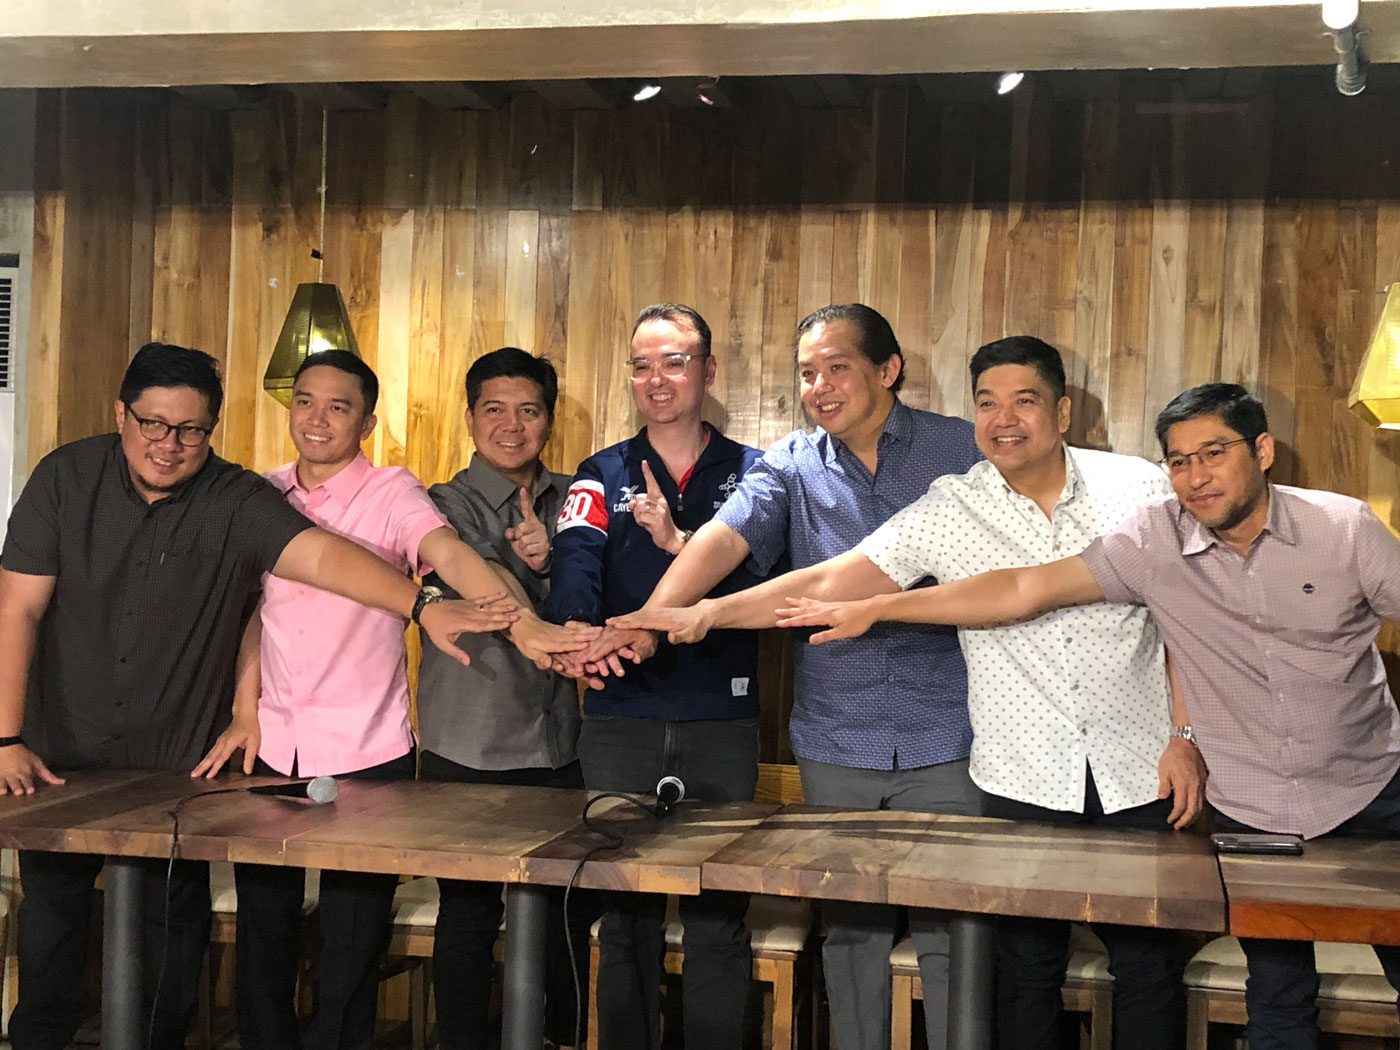 THE SPEAKER'S MEN. Speaker Alan Peter Cayetano (center) poses for a photo with House Deputy Secretary-General Brian Yamsuan, House committee on good government and public accountability chair Jose Sy-Alvarado, House committee on public accounts chair Mike Defensor, Majority Leader Martin Romualdez, Deputy Speaker LRay Villafuerte, and House Secretary-General Luis Montales. Photo by Mara Cepeda/Rappler